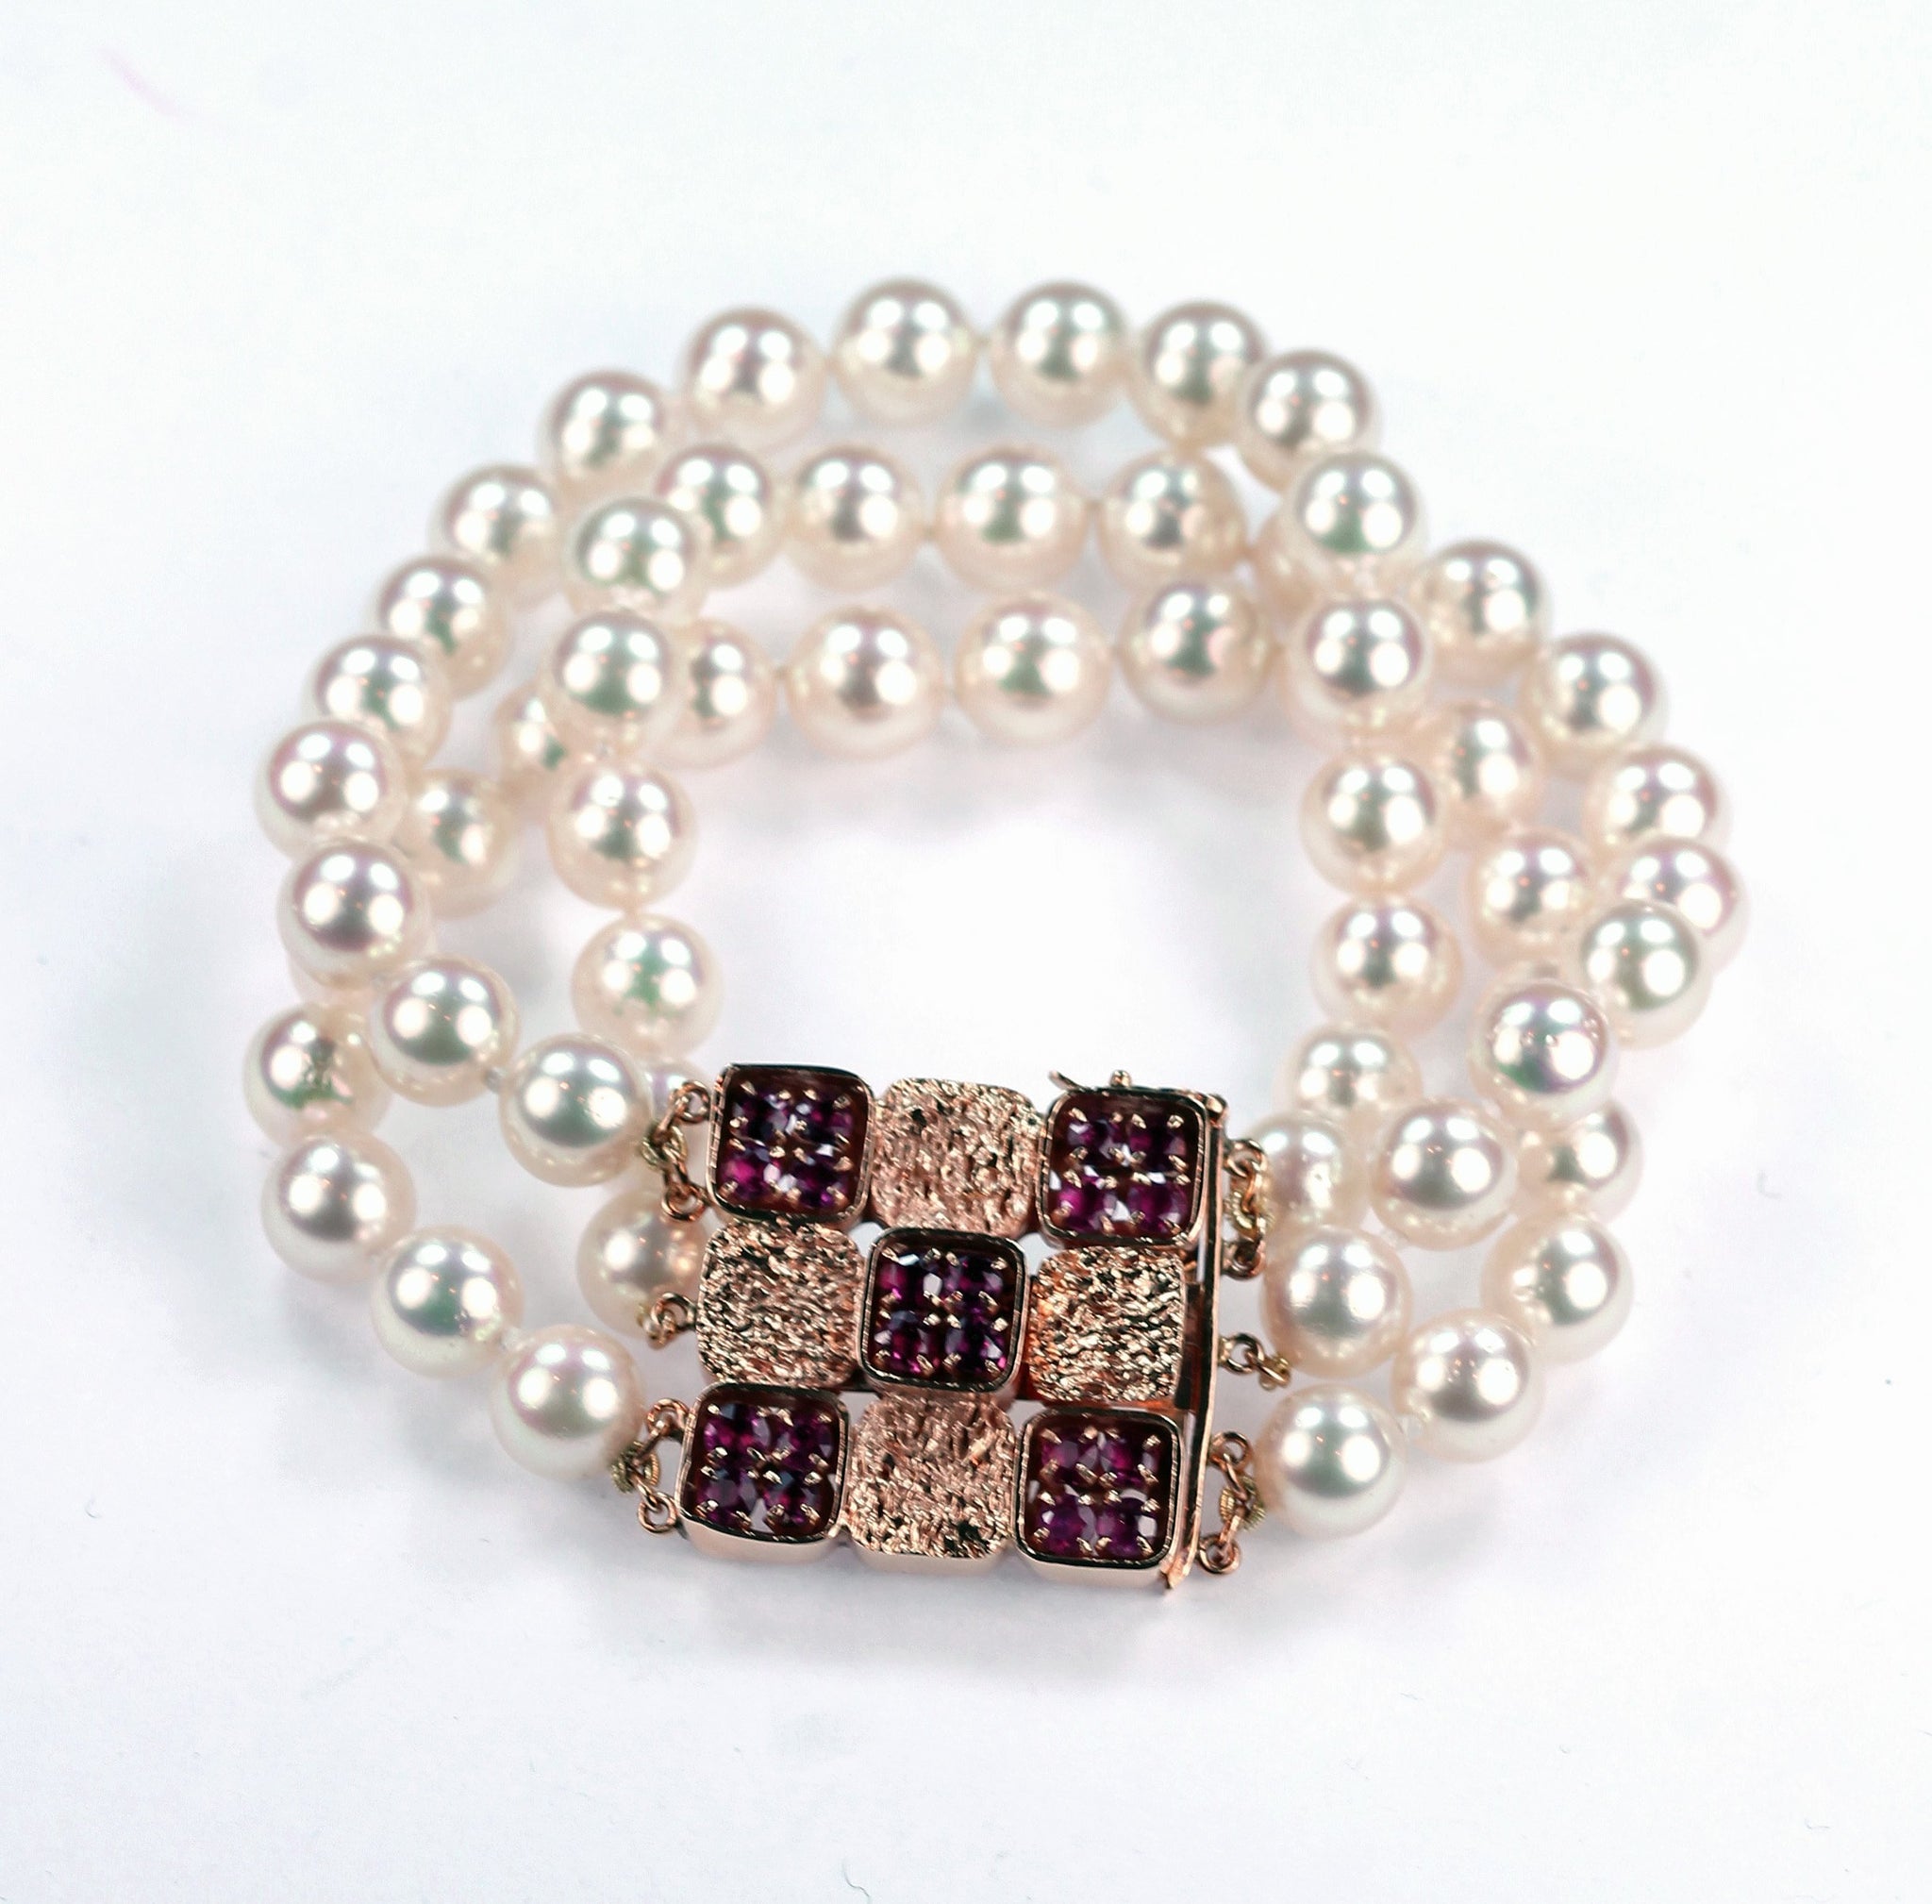 Deco Ruby and Pearl Bracelet